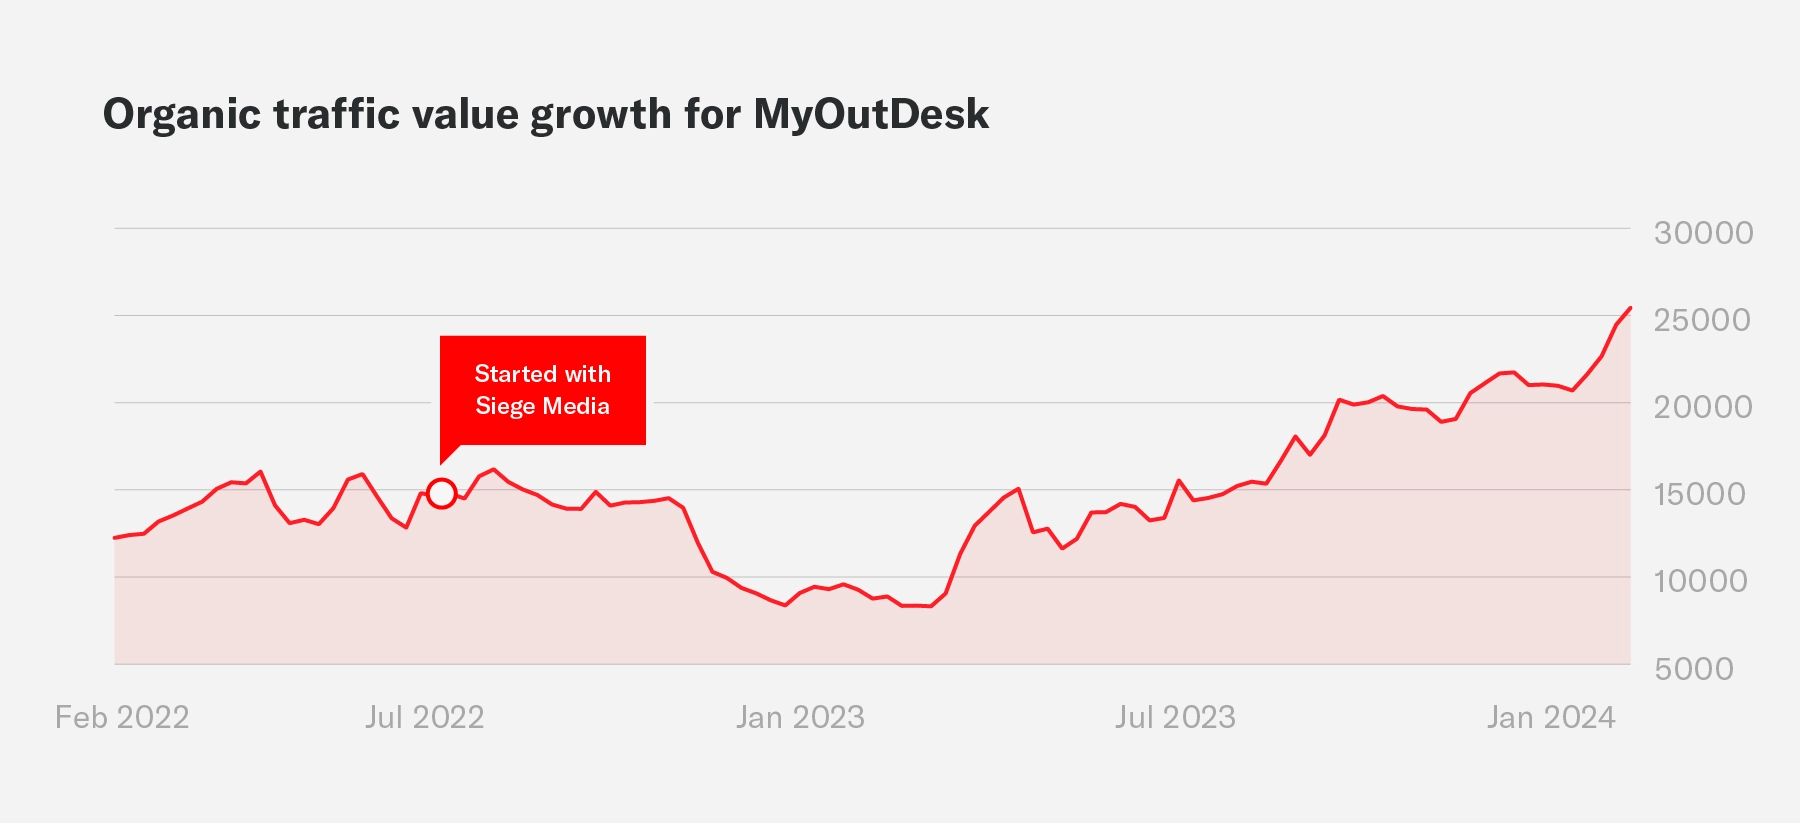 A graph that shows organic traffic value growth for MyOutDesk during an engagement with Siege Media.